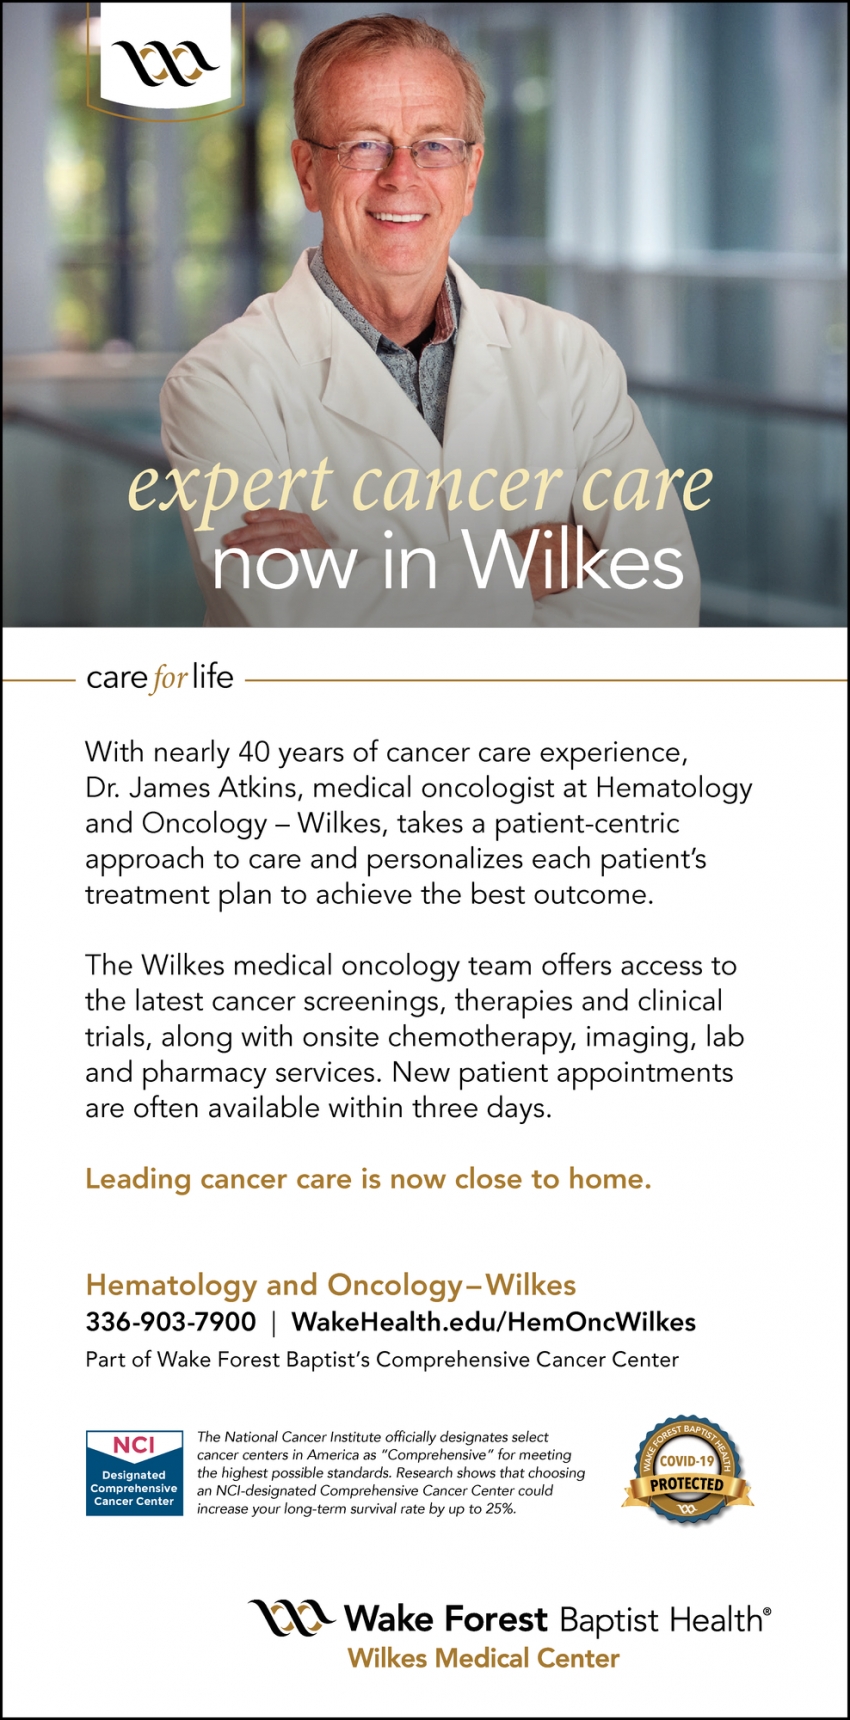 Expert Cancer Care Now in Wilkes